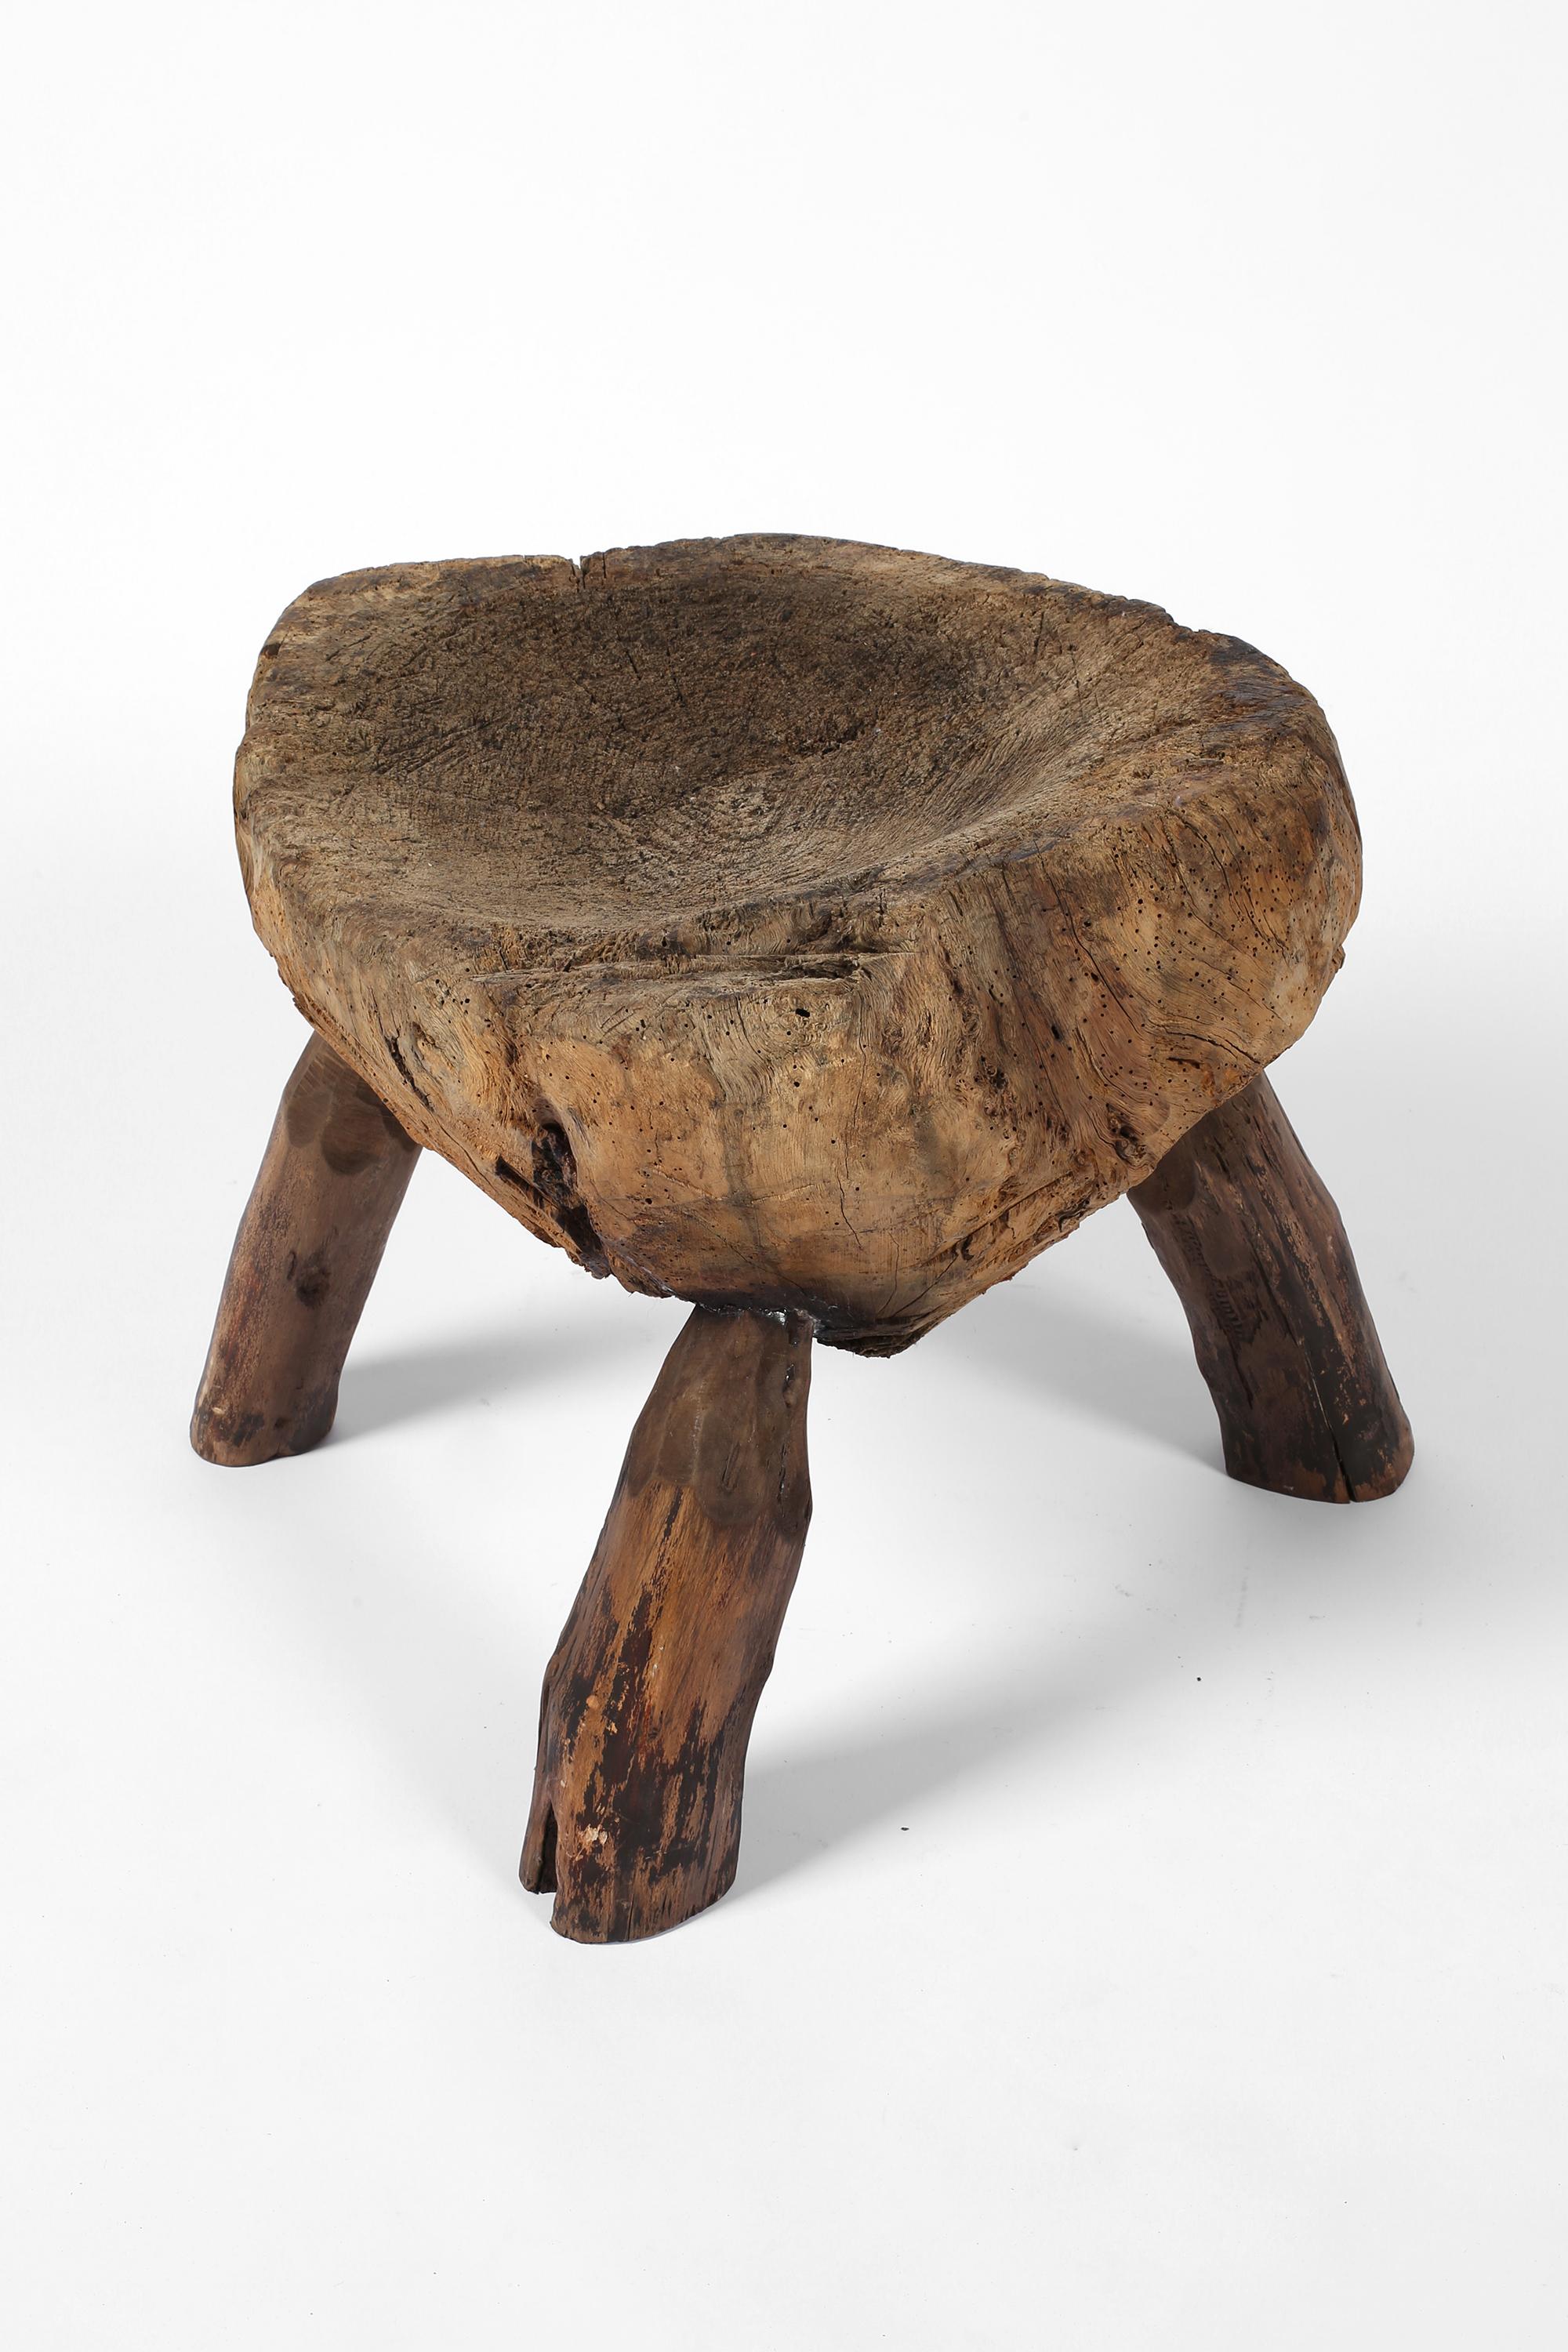 Early 19th Century French Primitive Rustic Wabi-Sabi Block Stool For Sale 4